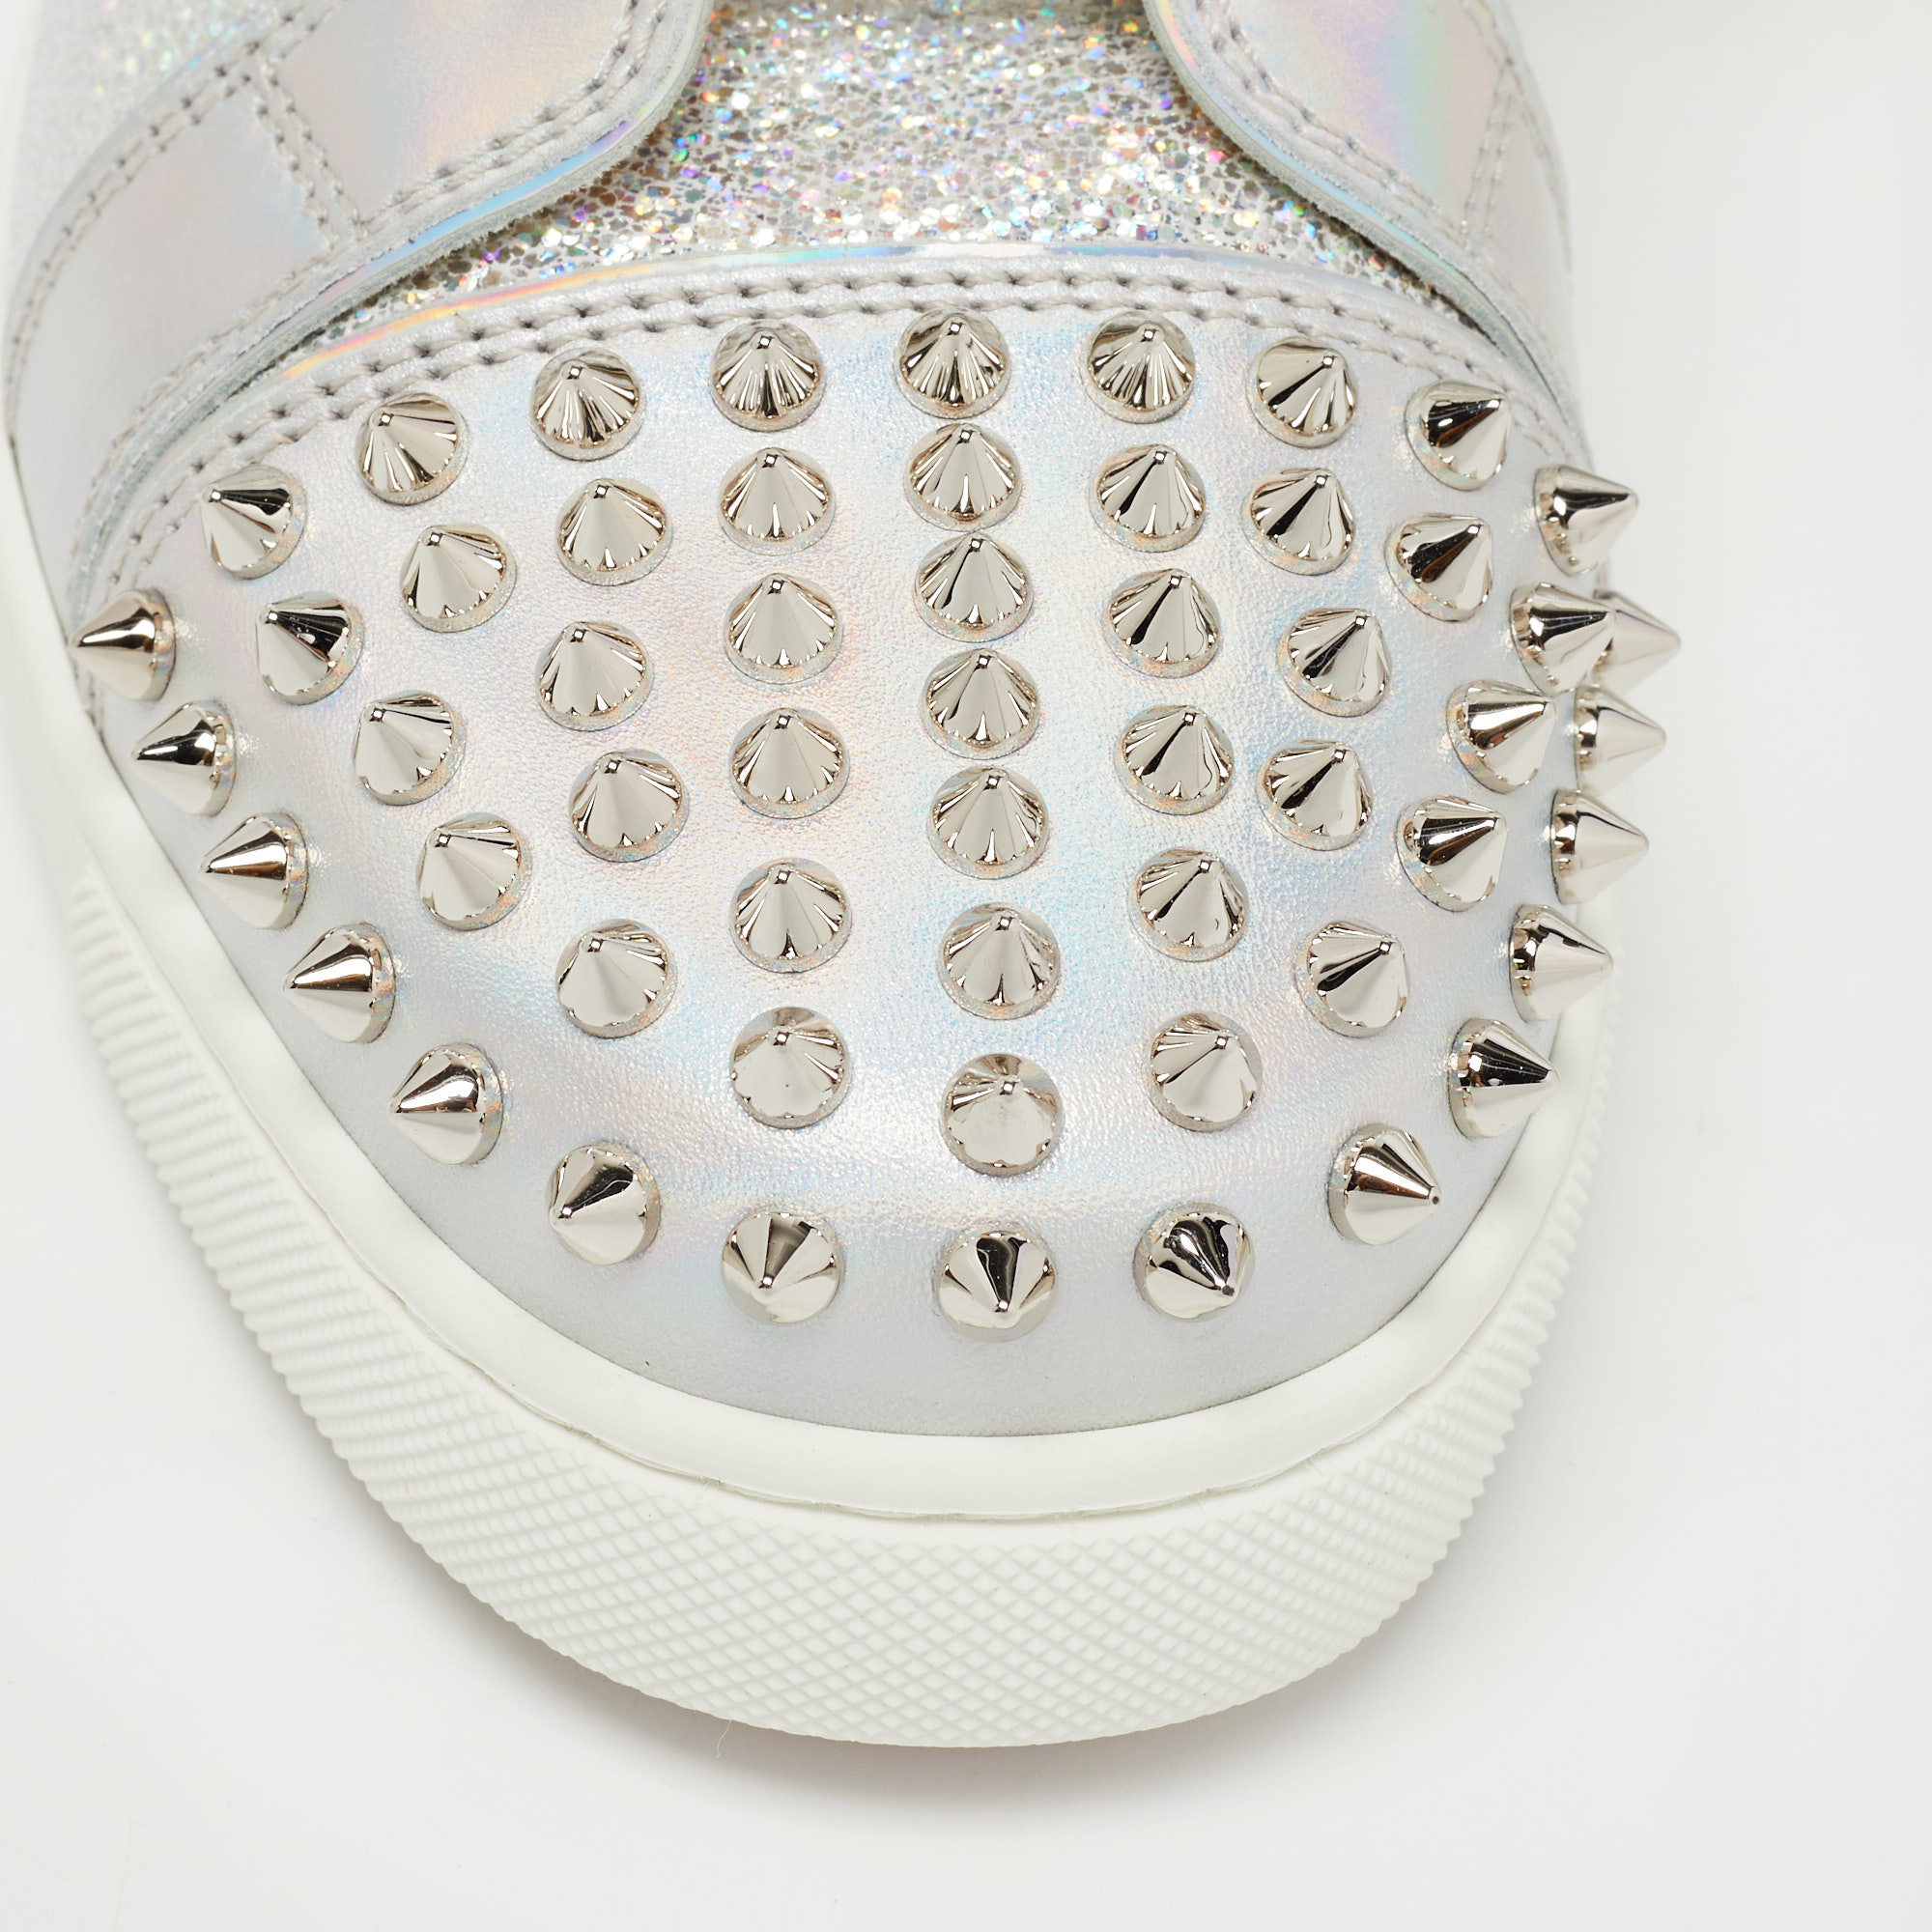 Christian Louboutin Silver Laminated Suede And Leather Lou Spikes High Top Sneakers Size 39